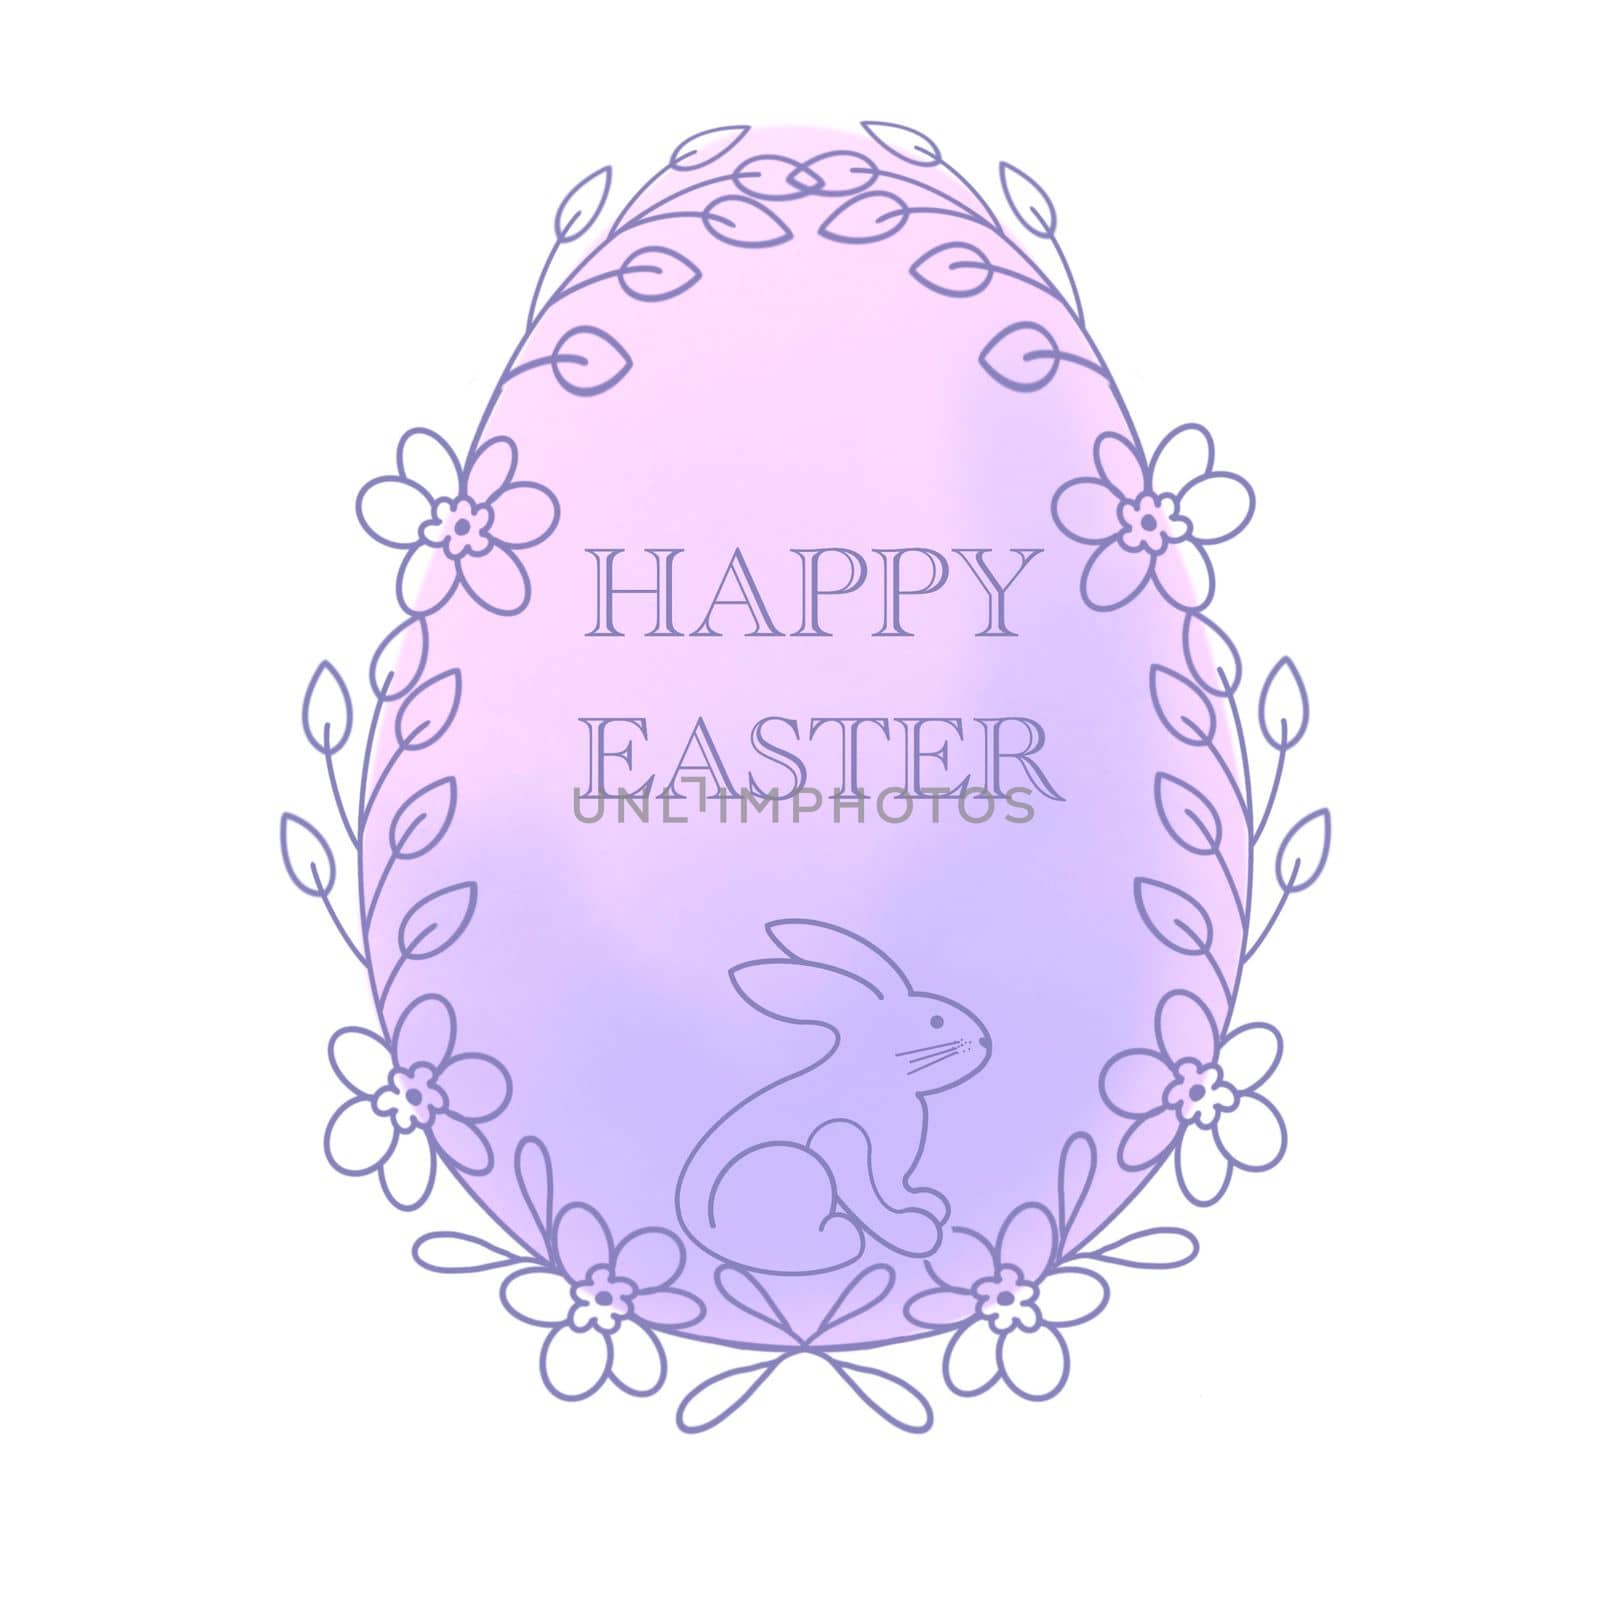 Floral banner with happy easter bunny. Illustration on a white background. by Olga_OLiAN